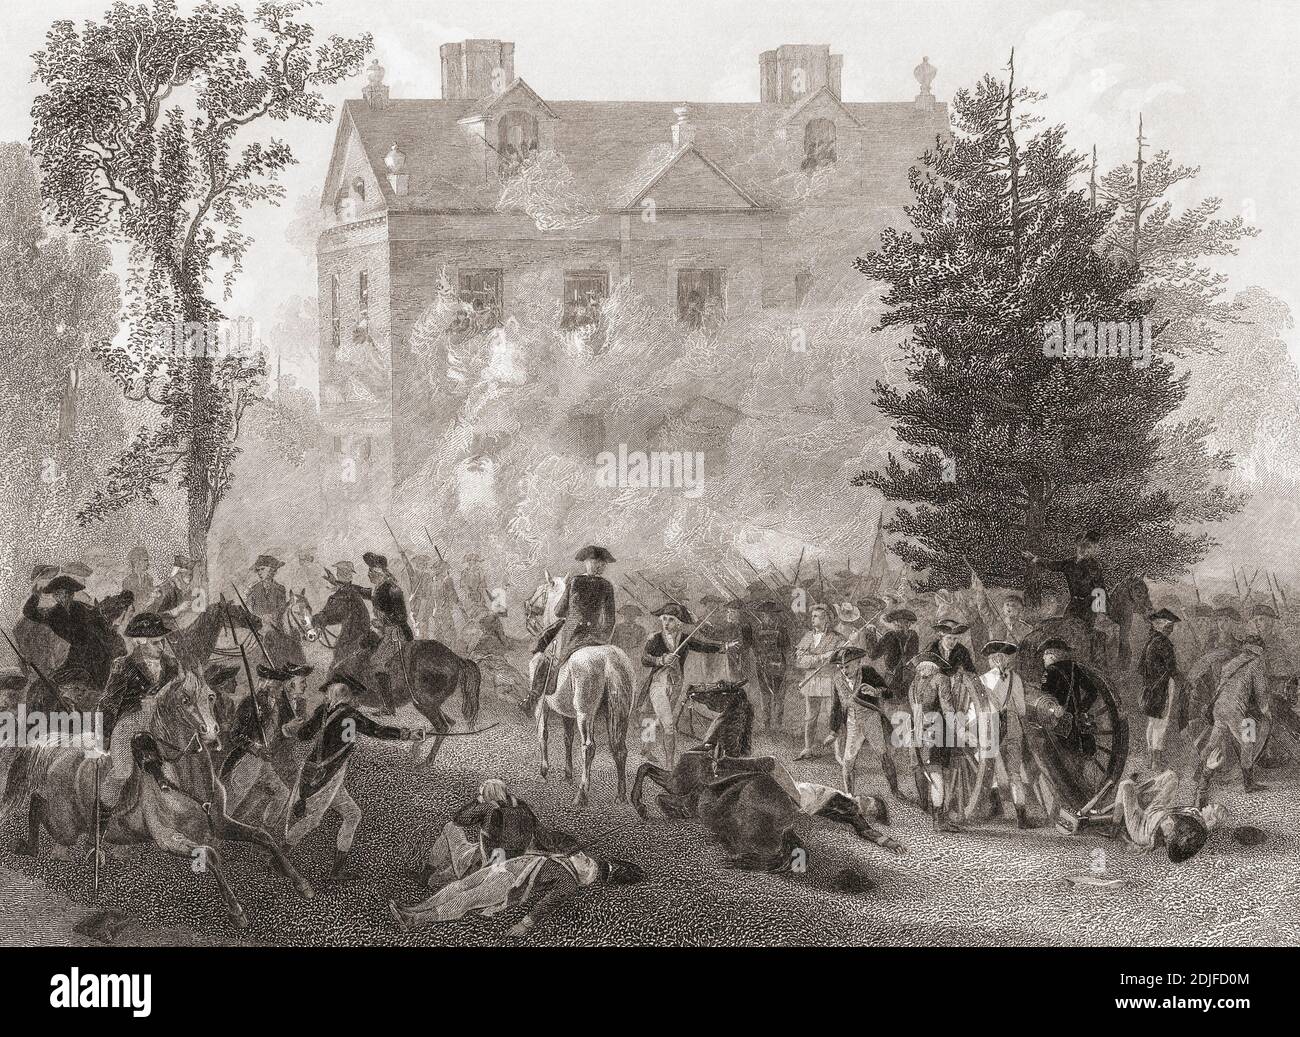 The Battle of Germantown which took place on October 4, 1777  between British and American forces during the American Revolutionary War.  In the picture, action around the house of Chief Justice Chew.  From an engraving by Hinshelwood after a work by Alonzo Chappel. Stock Photo